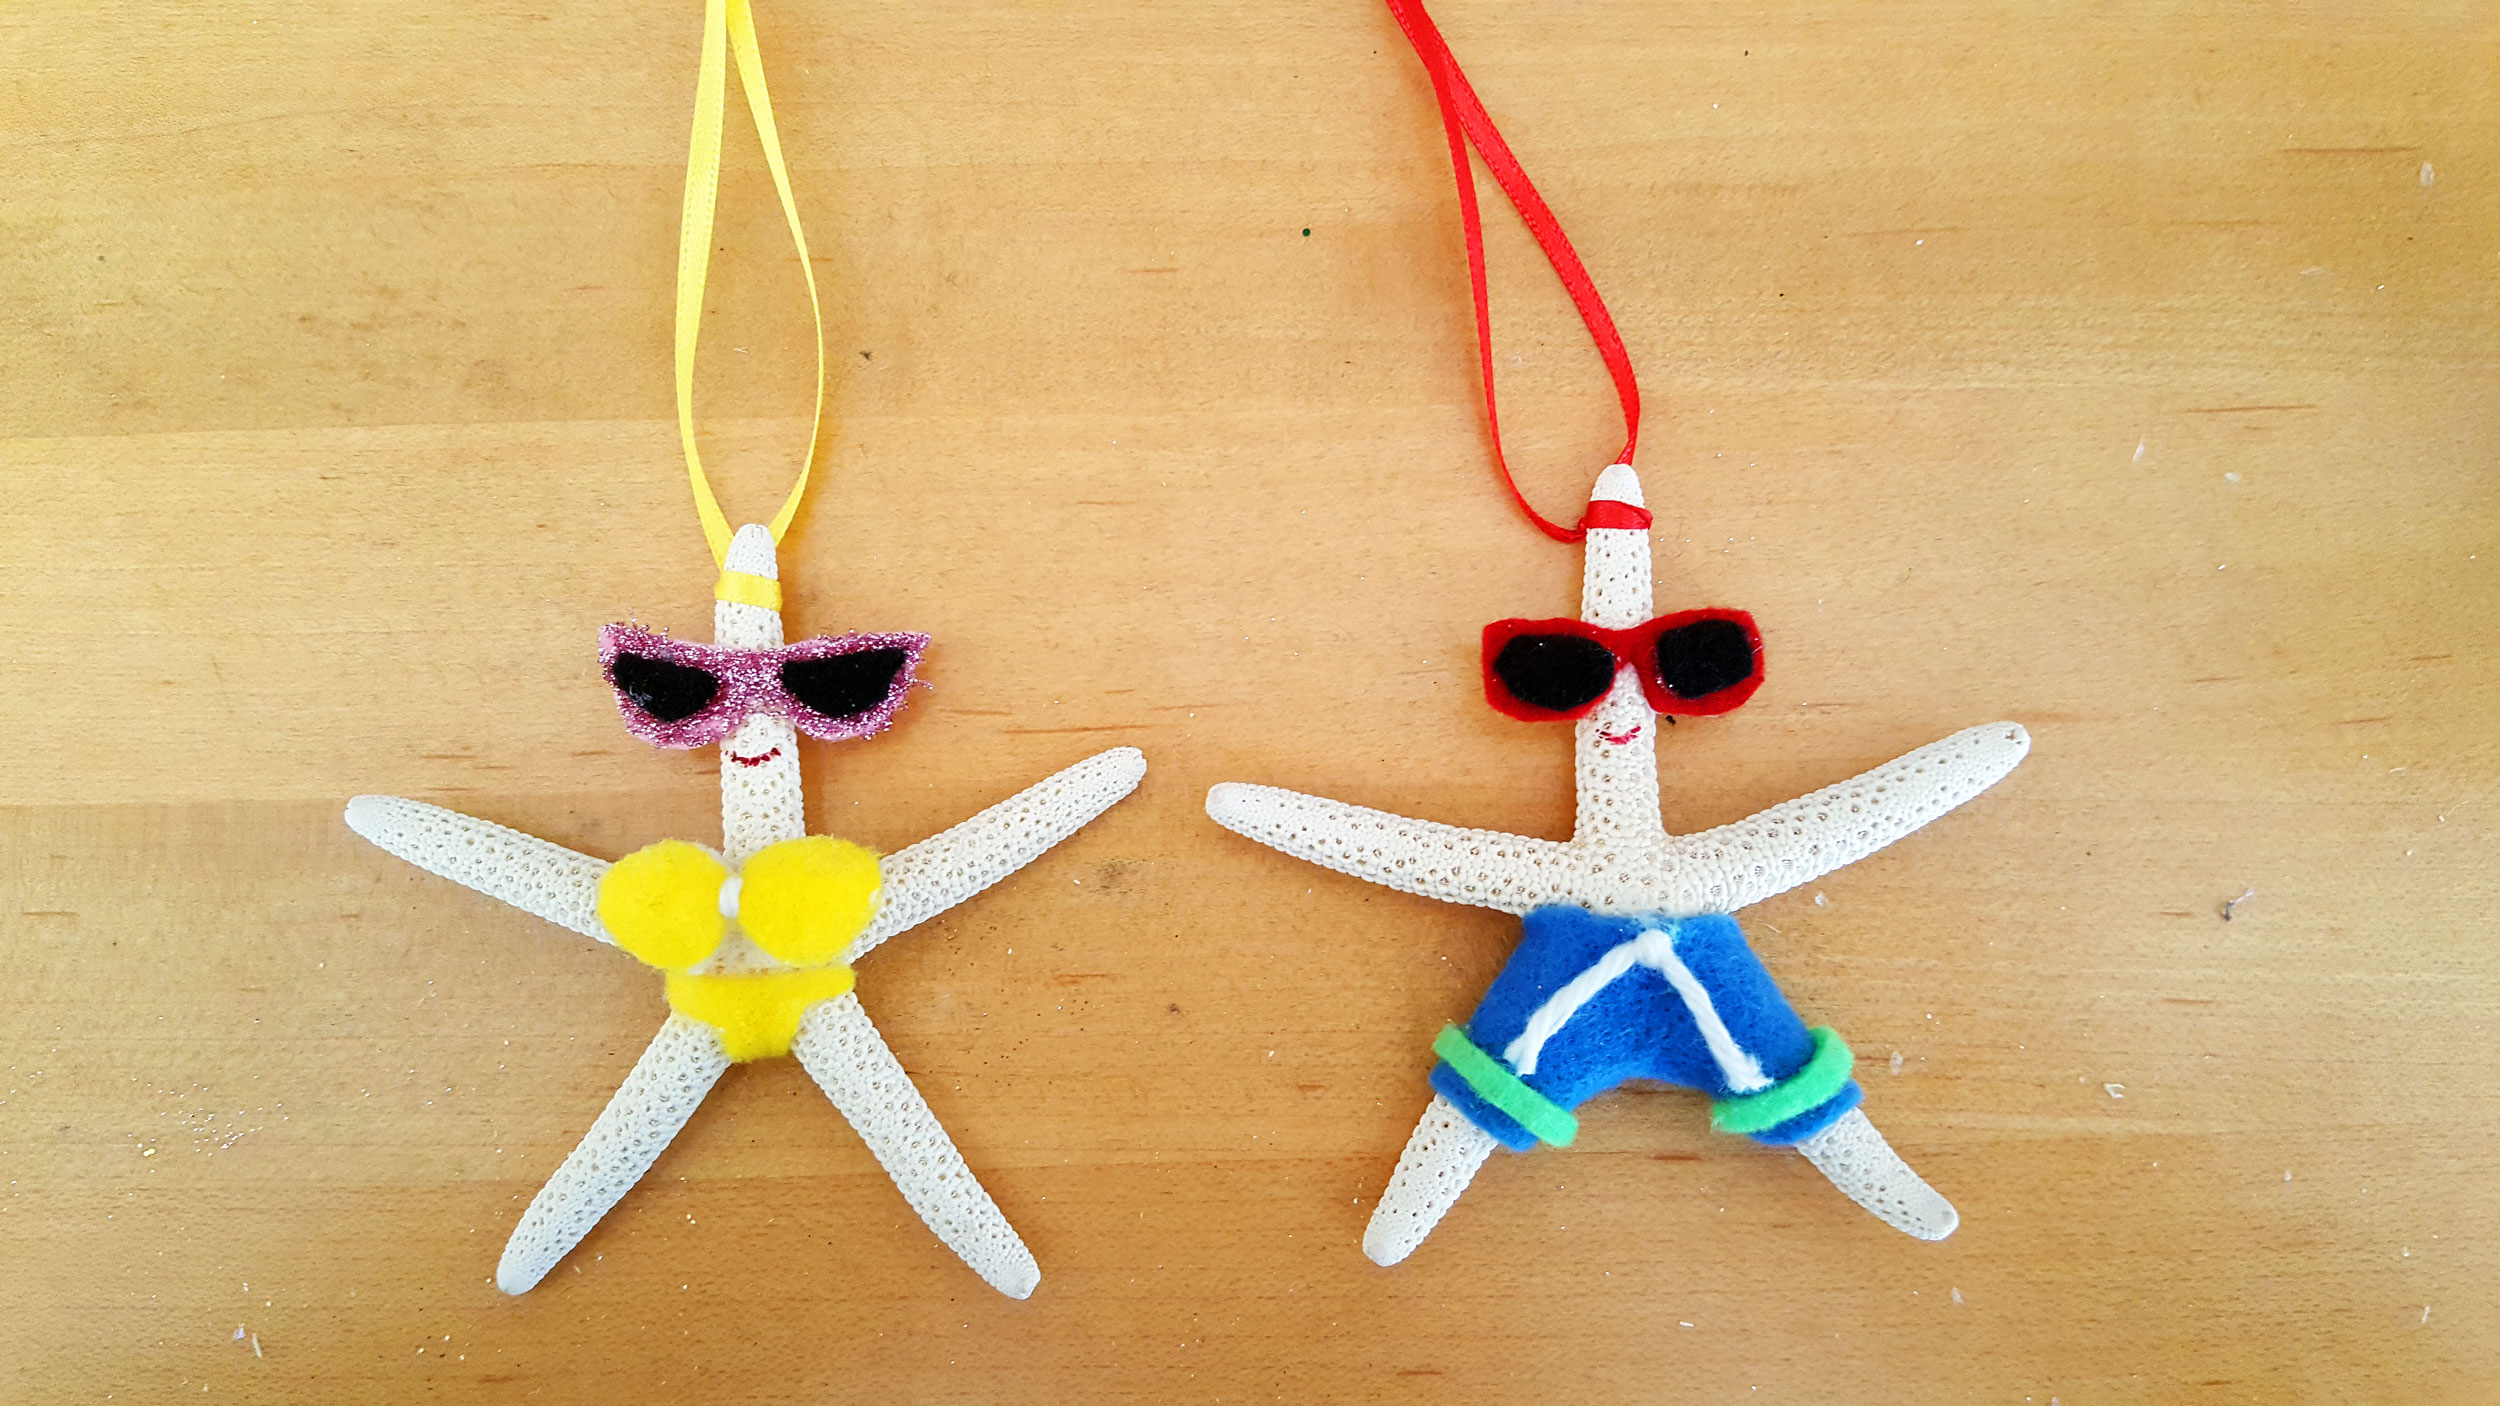 Completed Starfish Ornaments with ribbon for hanging. | OrnamentShop.com